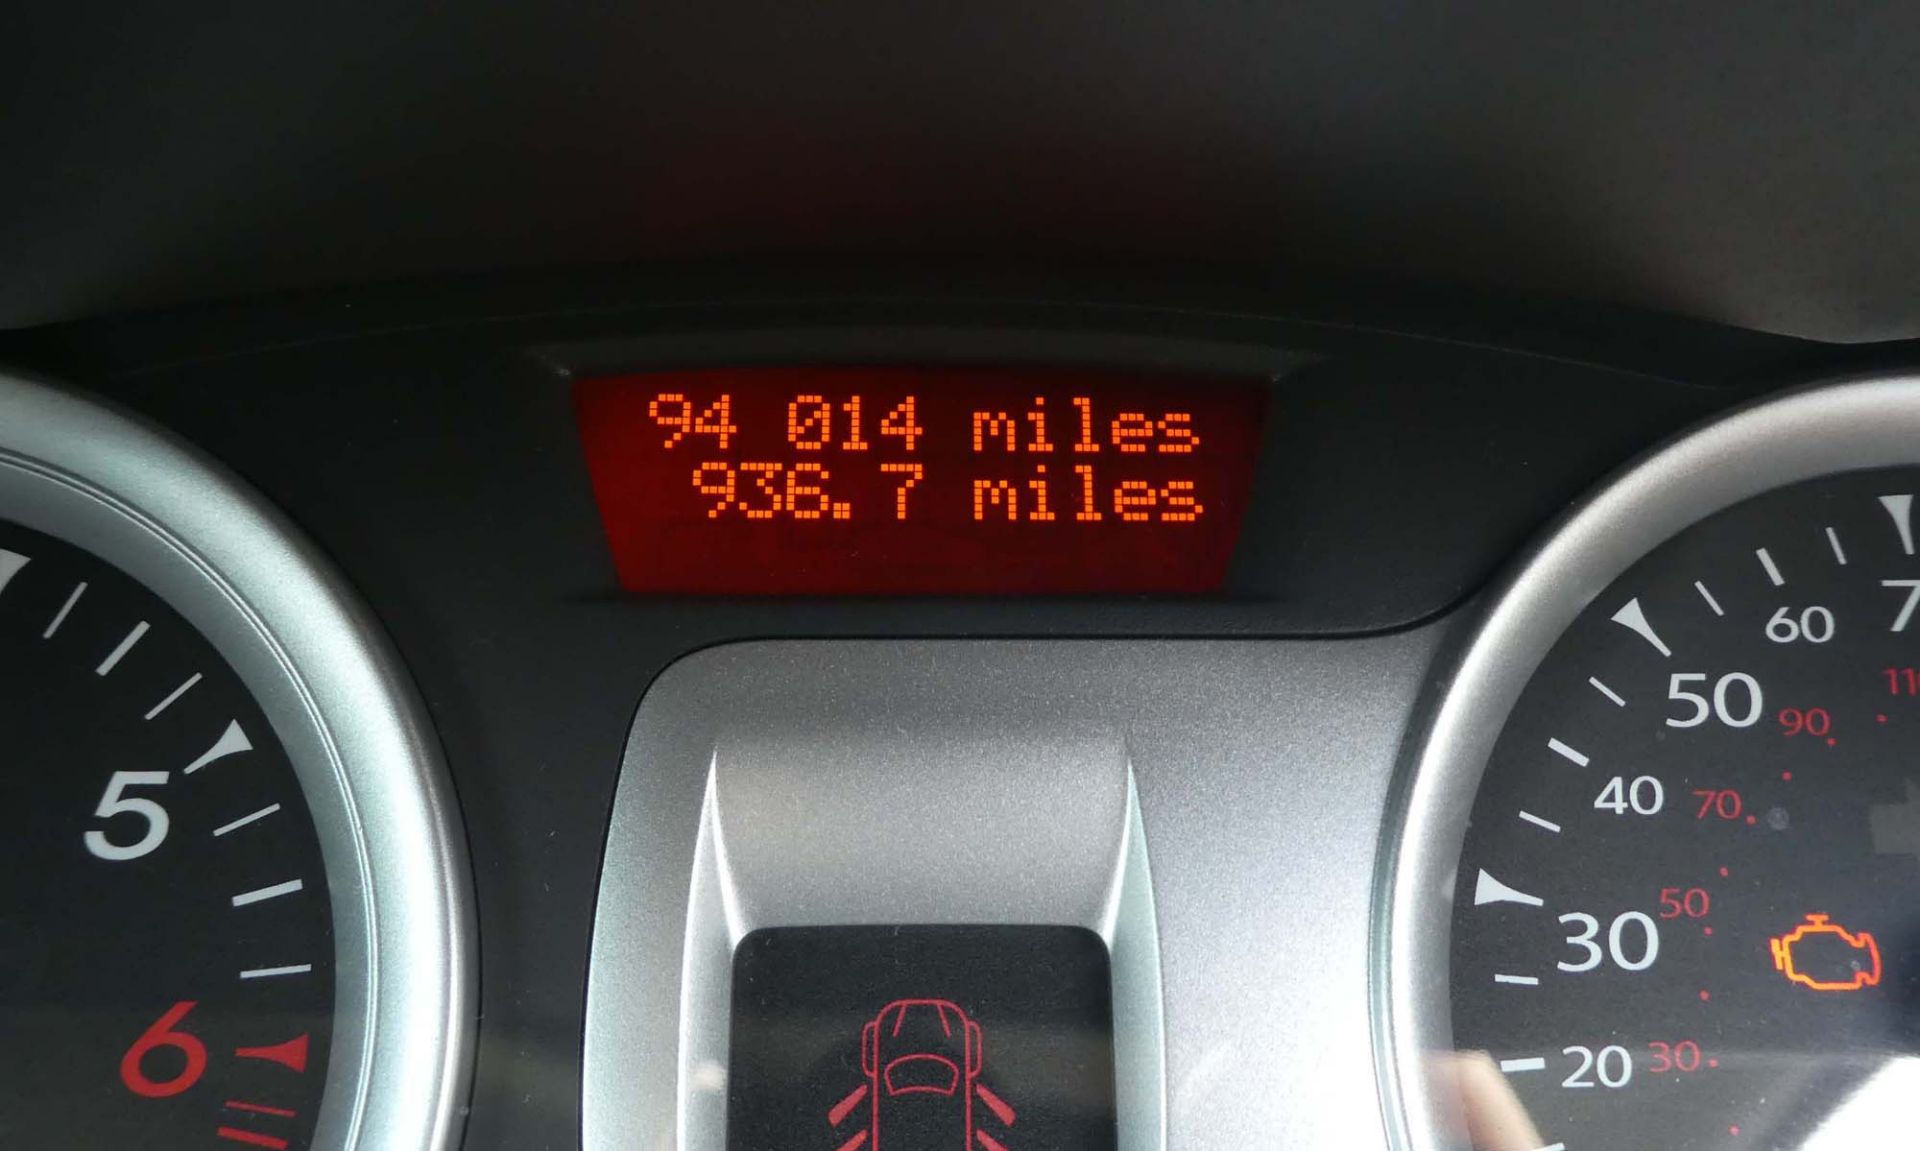 KU61 YTB Renault Clio Dynamique Tomtom 16v in black, first registered 26.09.2011, one key, 1149cc, - Image 3 of 12